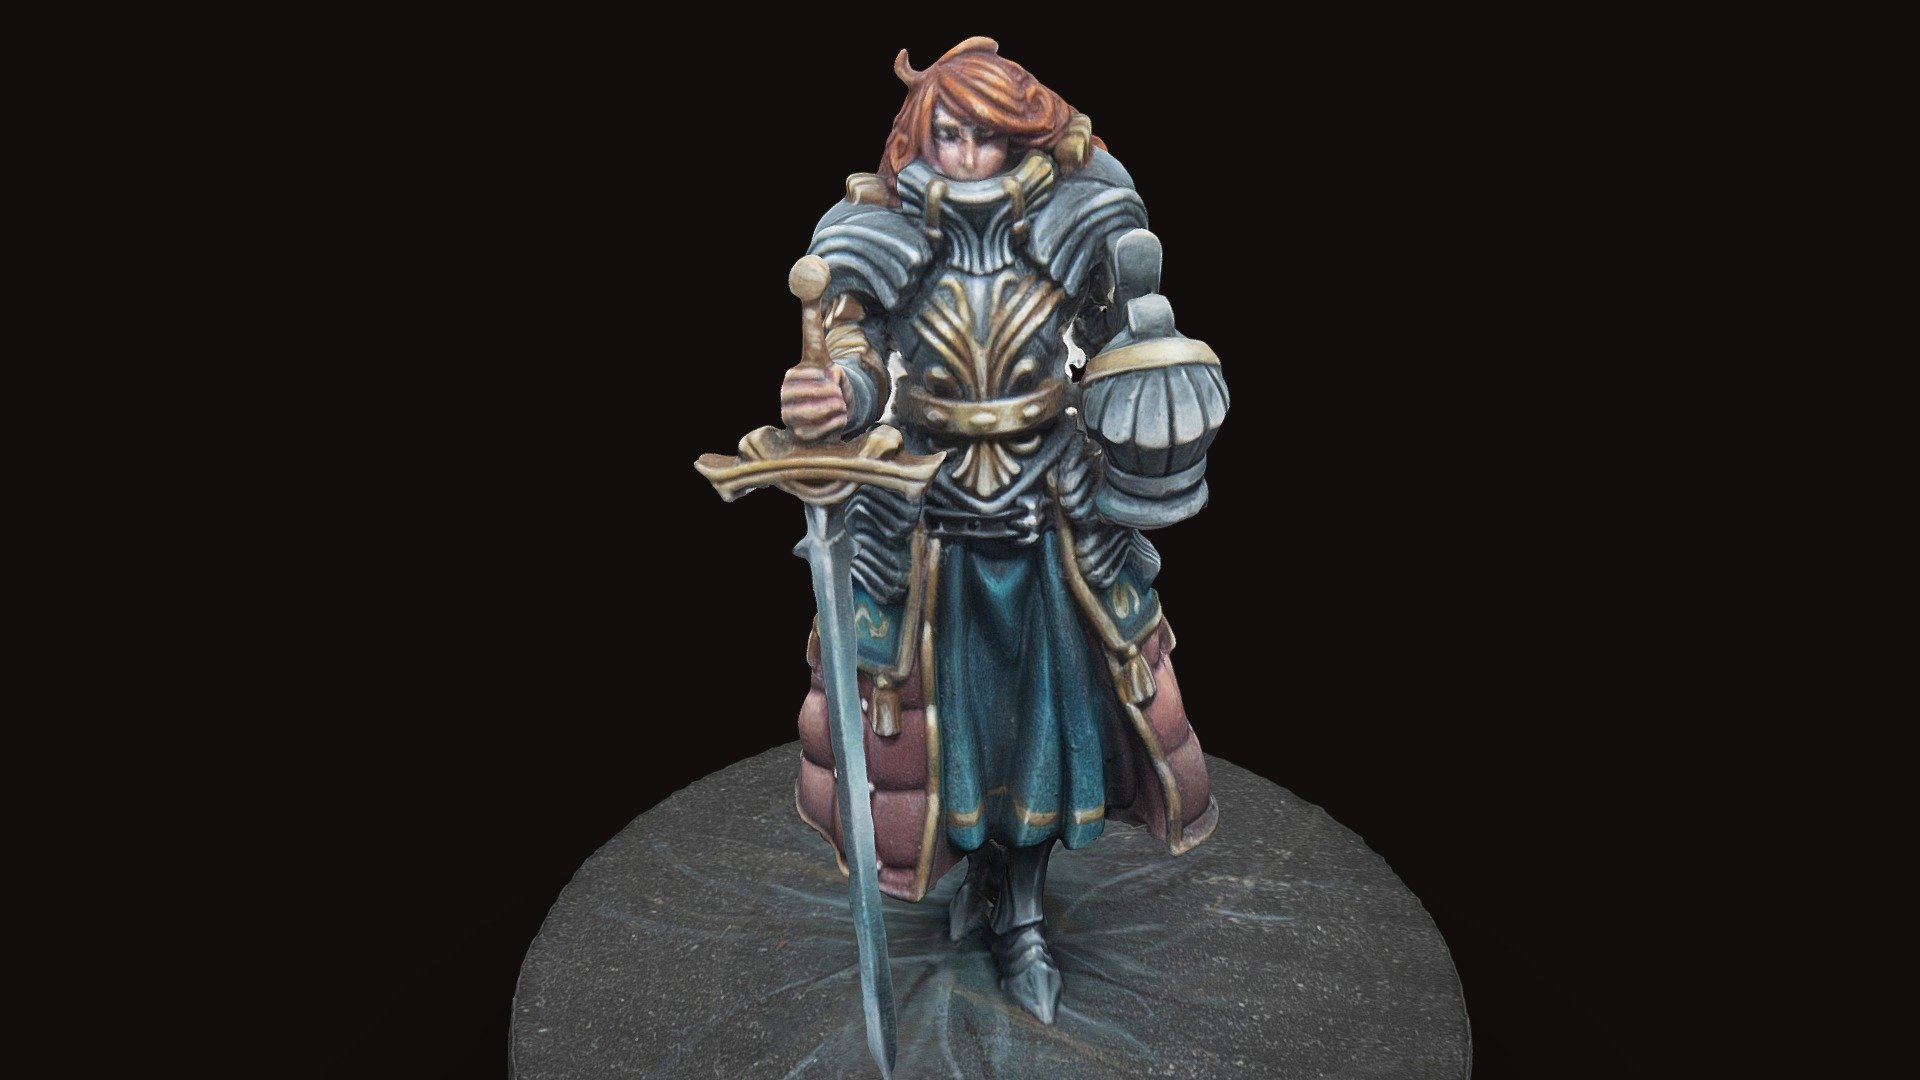 A miniature from the Kingdom Death range.

Painted by me, reconstructed in Metashape from 111 pictures 3d model